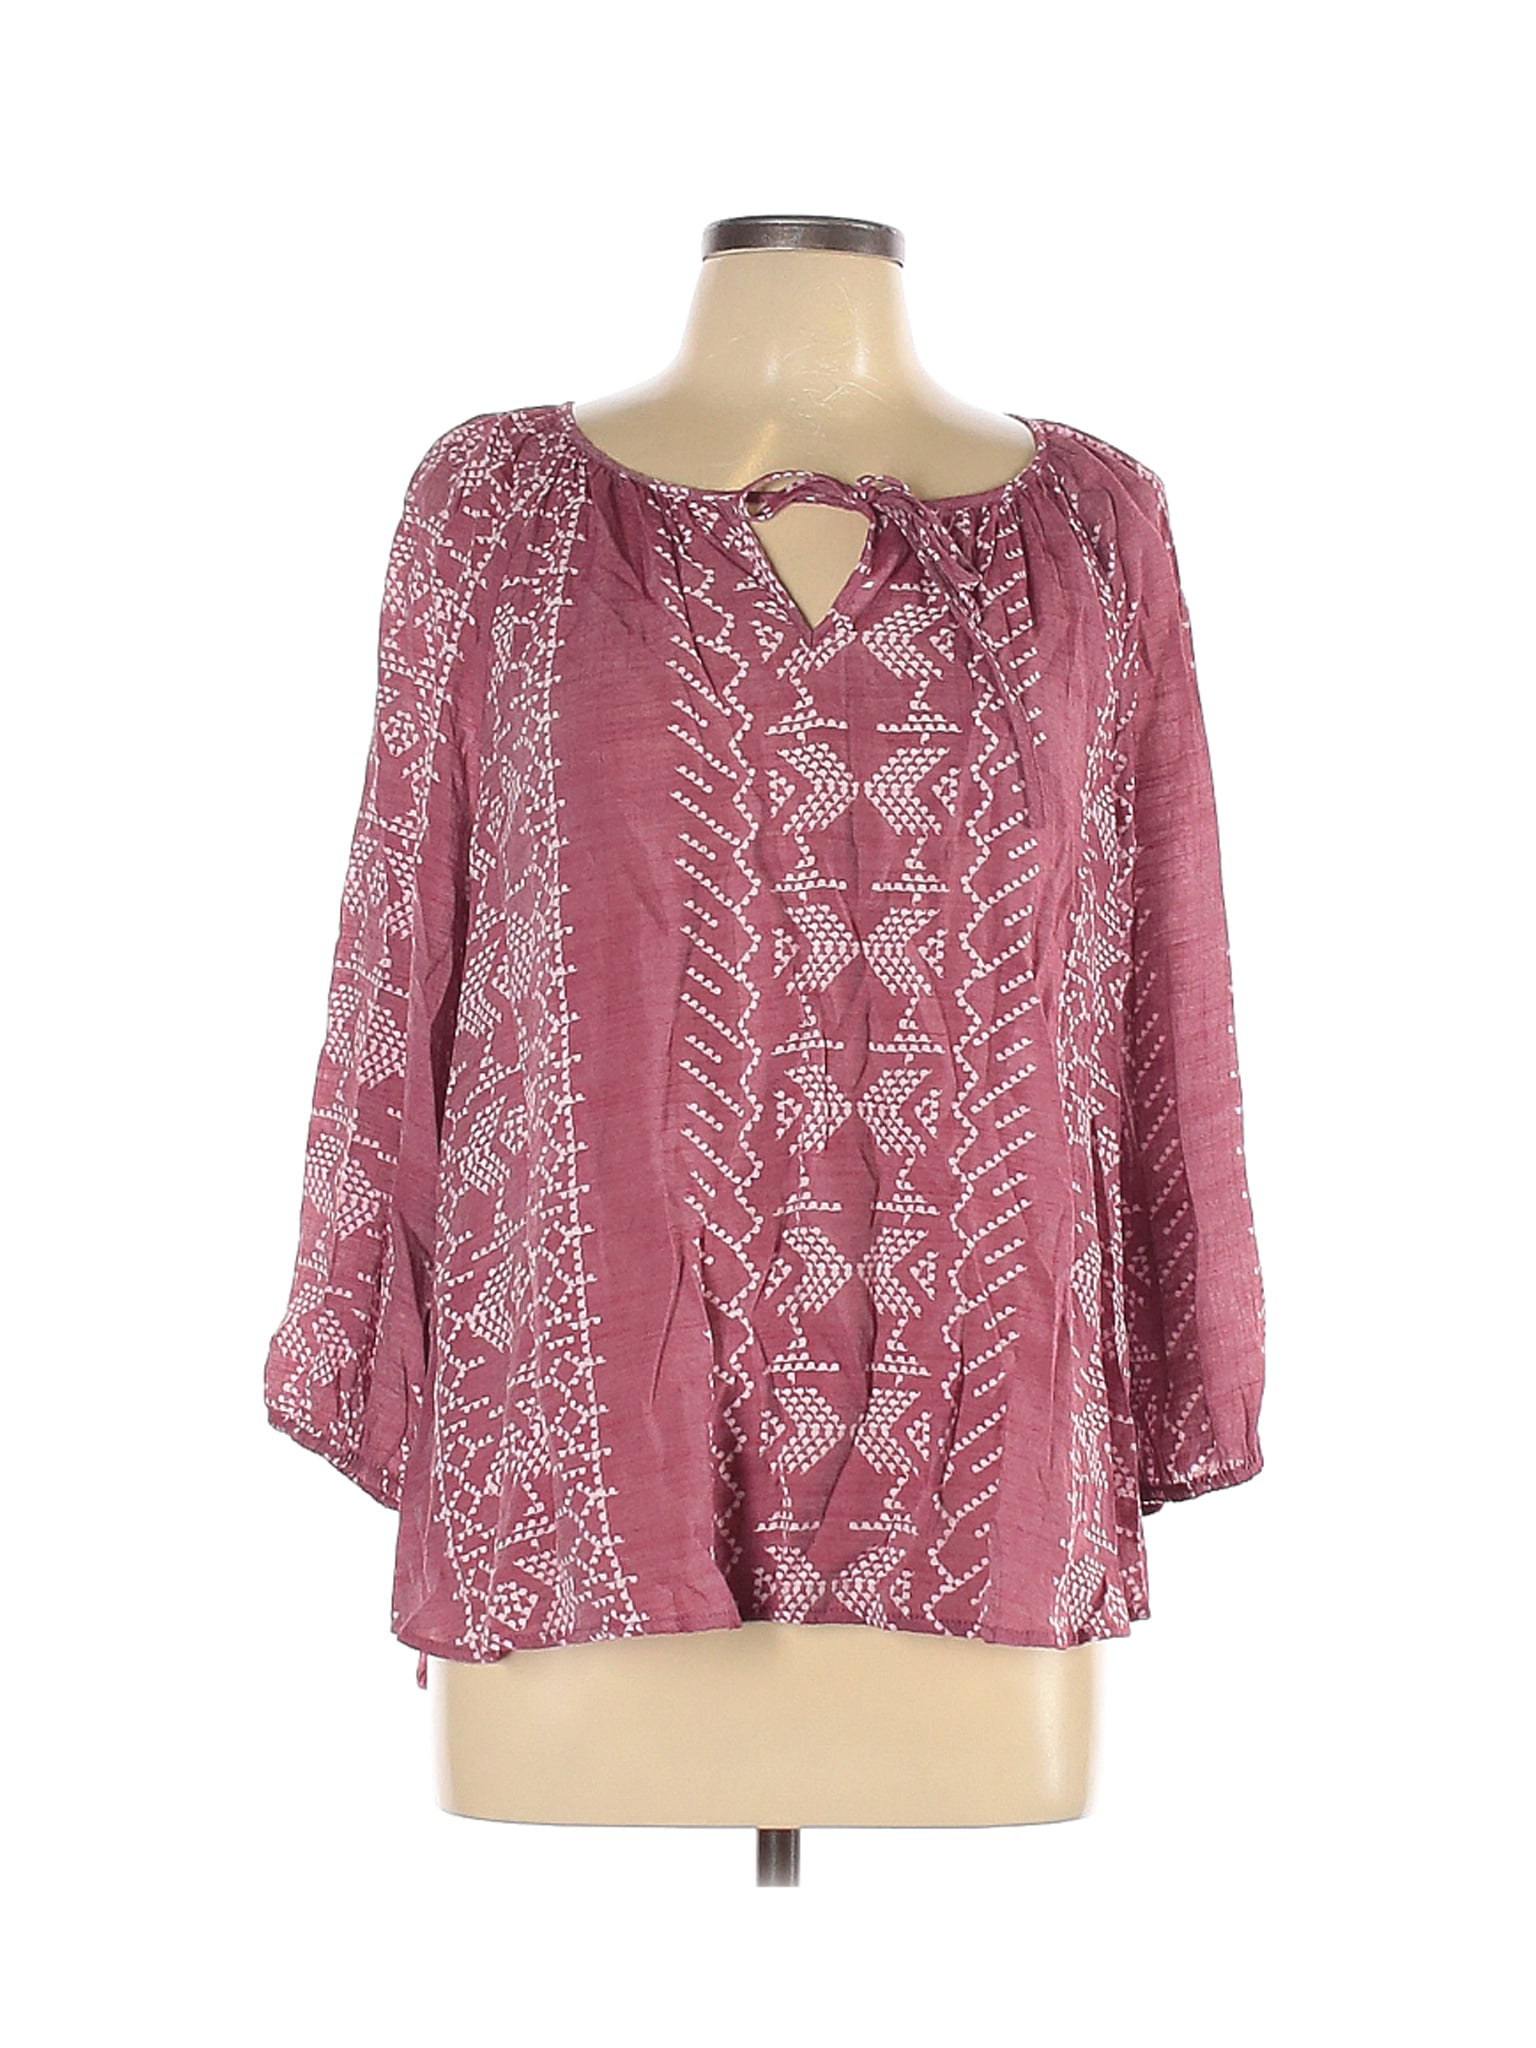 Fred David - Pre-Owned Fred David Women's Size L 3/4 Sleeve Blouse ...